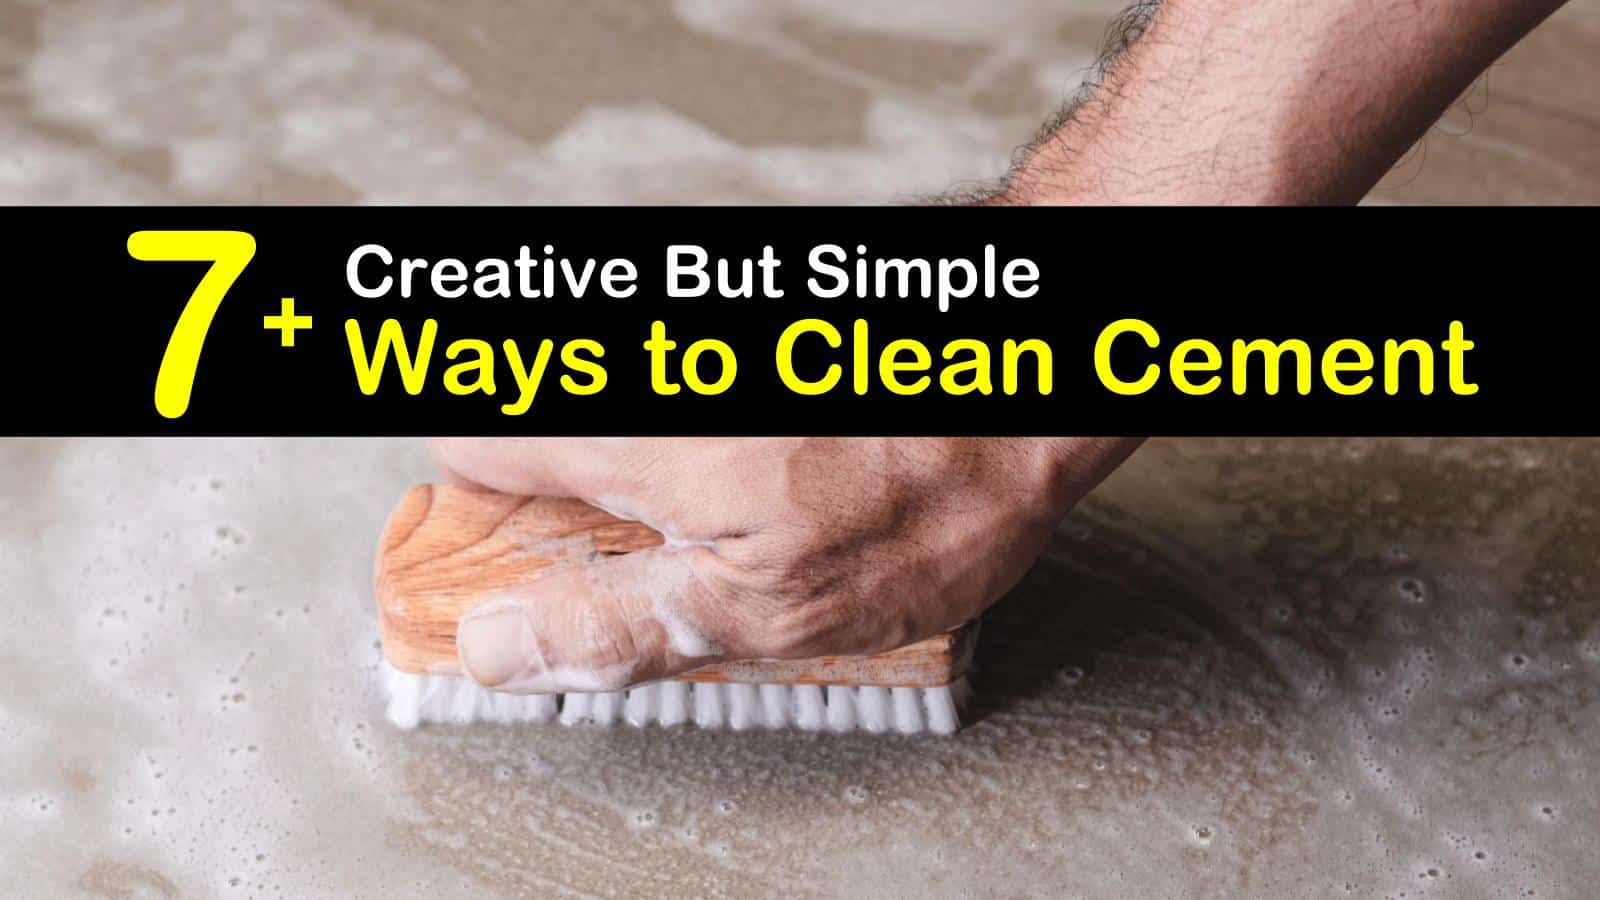 7+ Creative but Simple Ways to Clean Cement